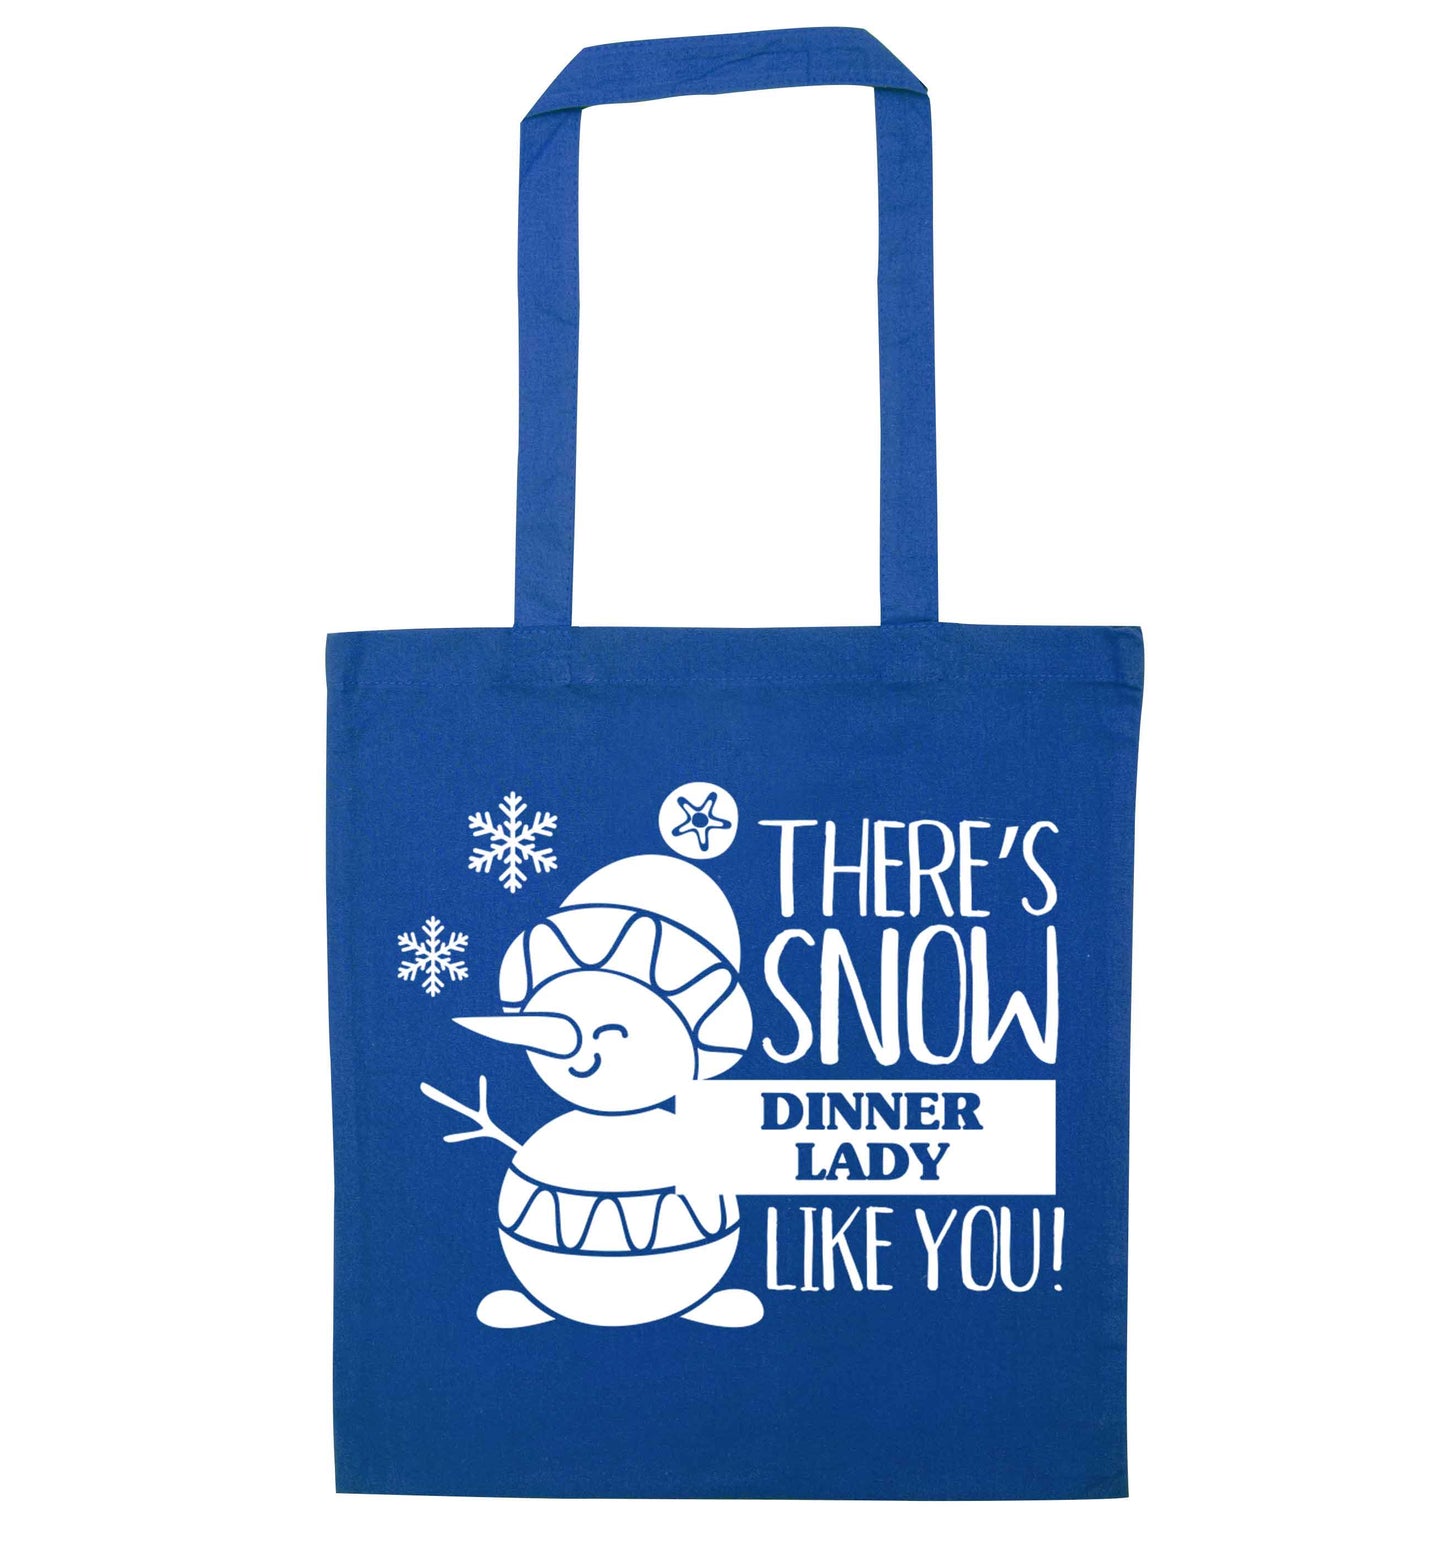 There's snow dinner lady like you blue tote bag